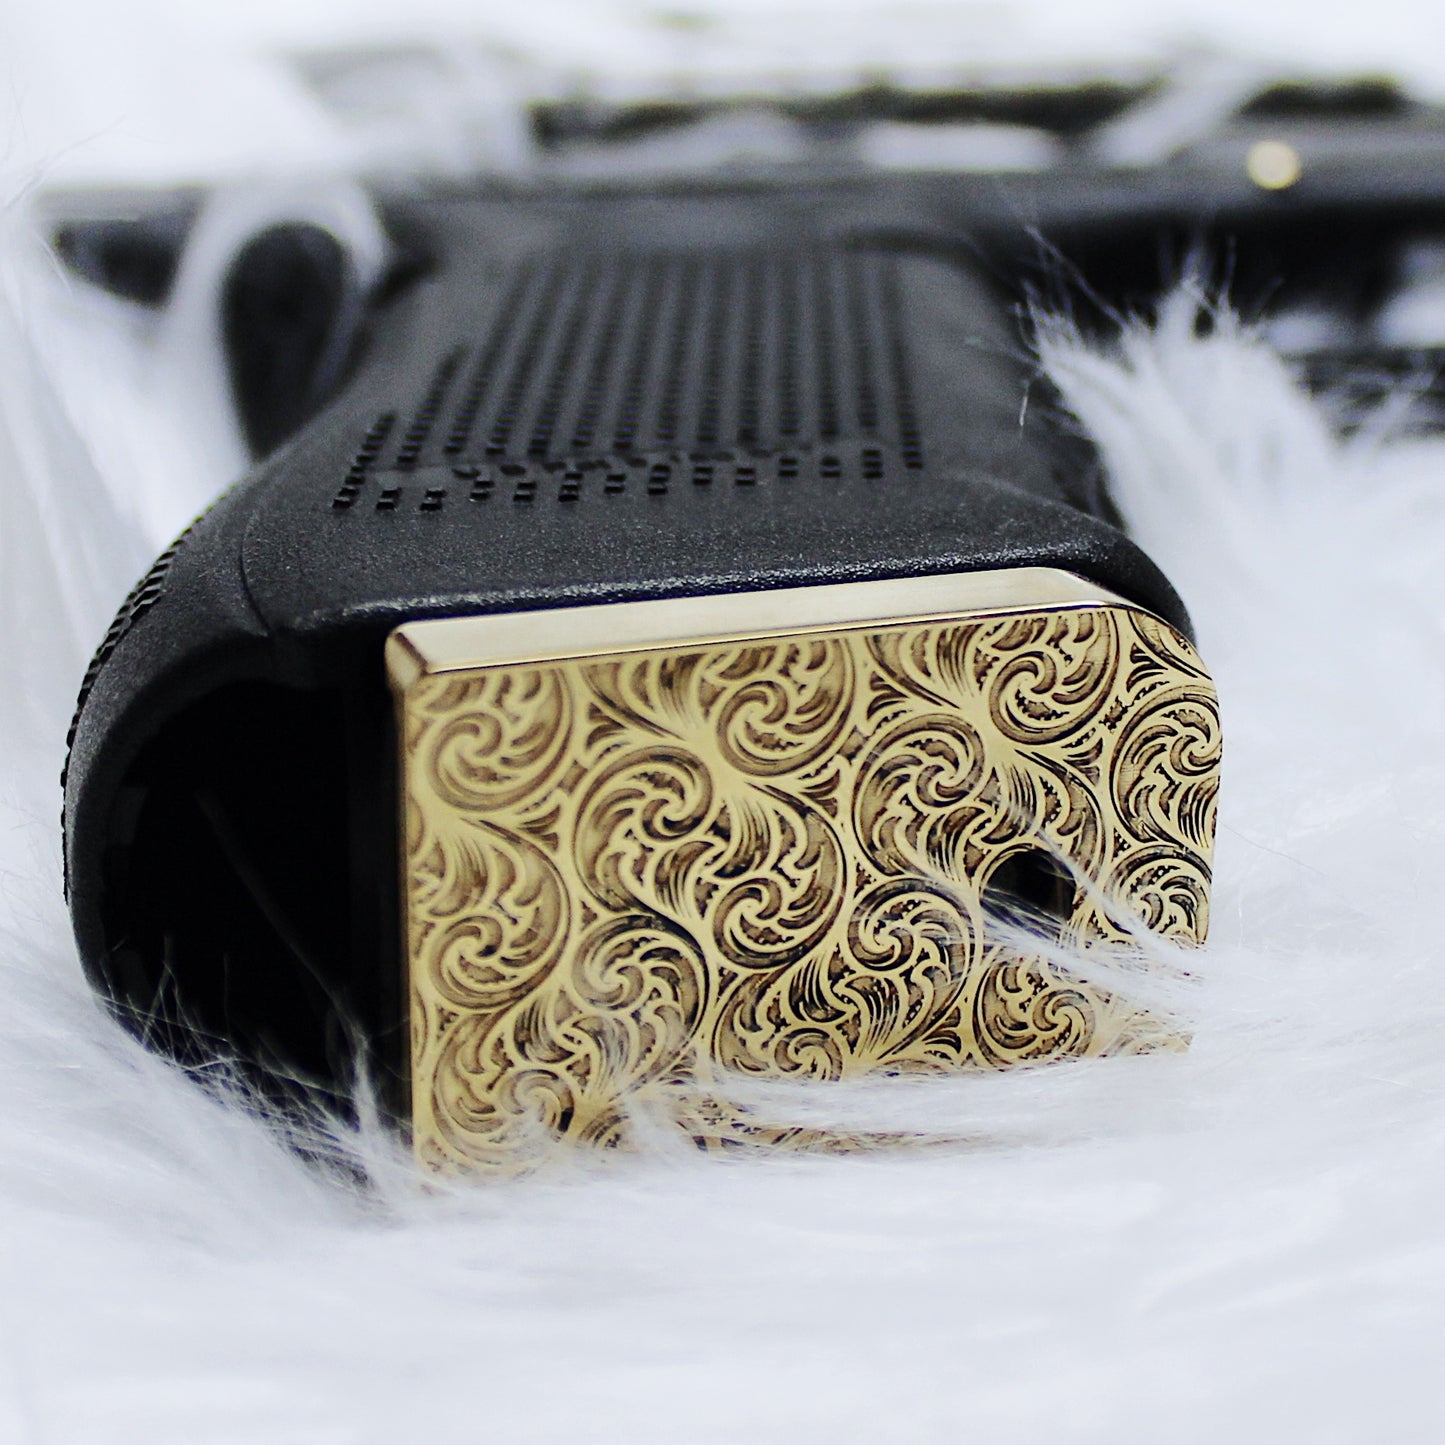 gold plated glock